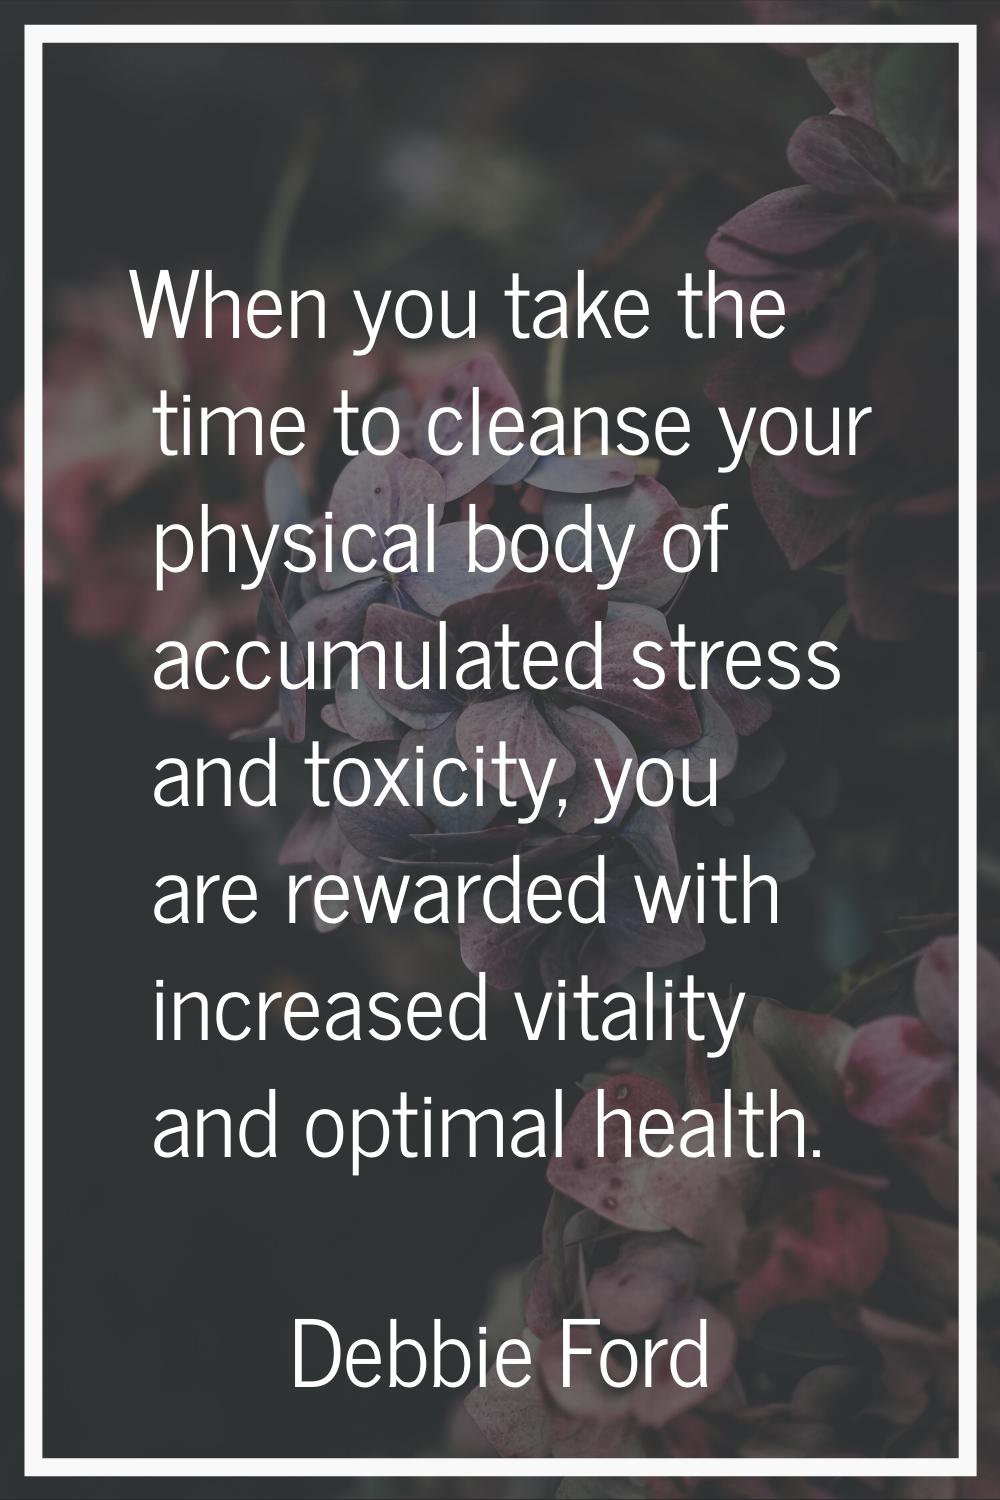 When you take the time to cleanse your physical body of accumulated stress and toxicity, you are re